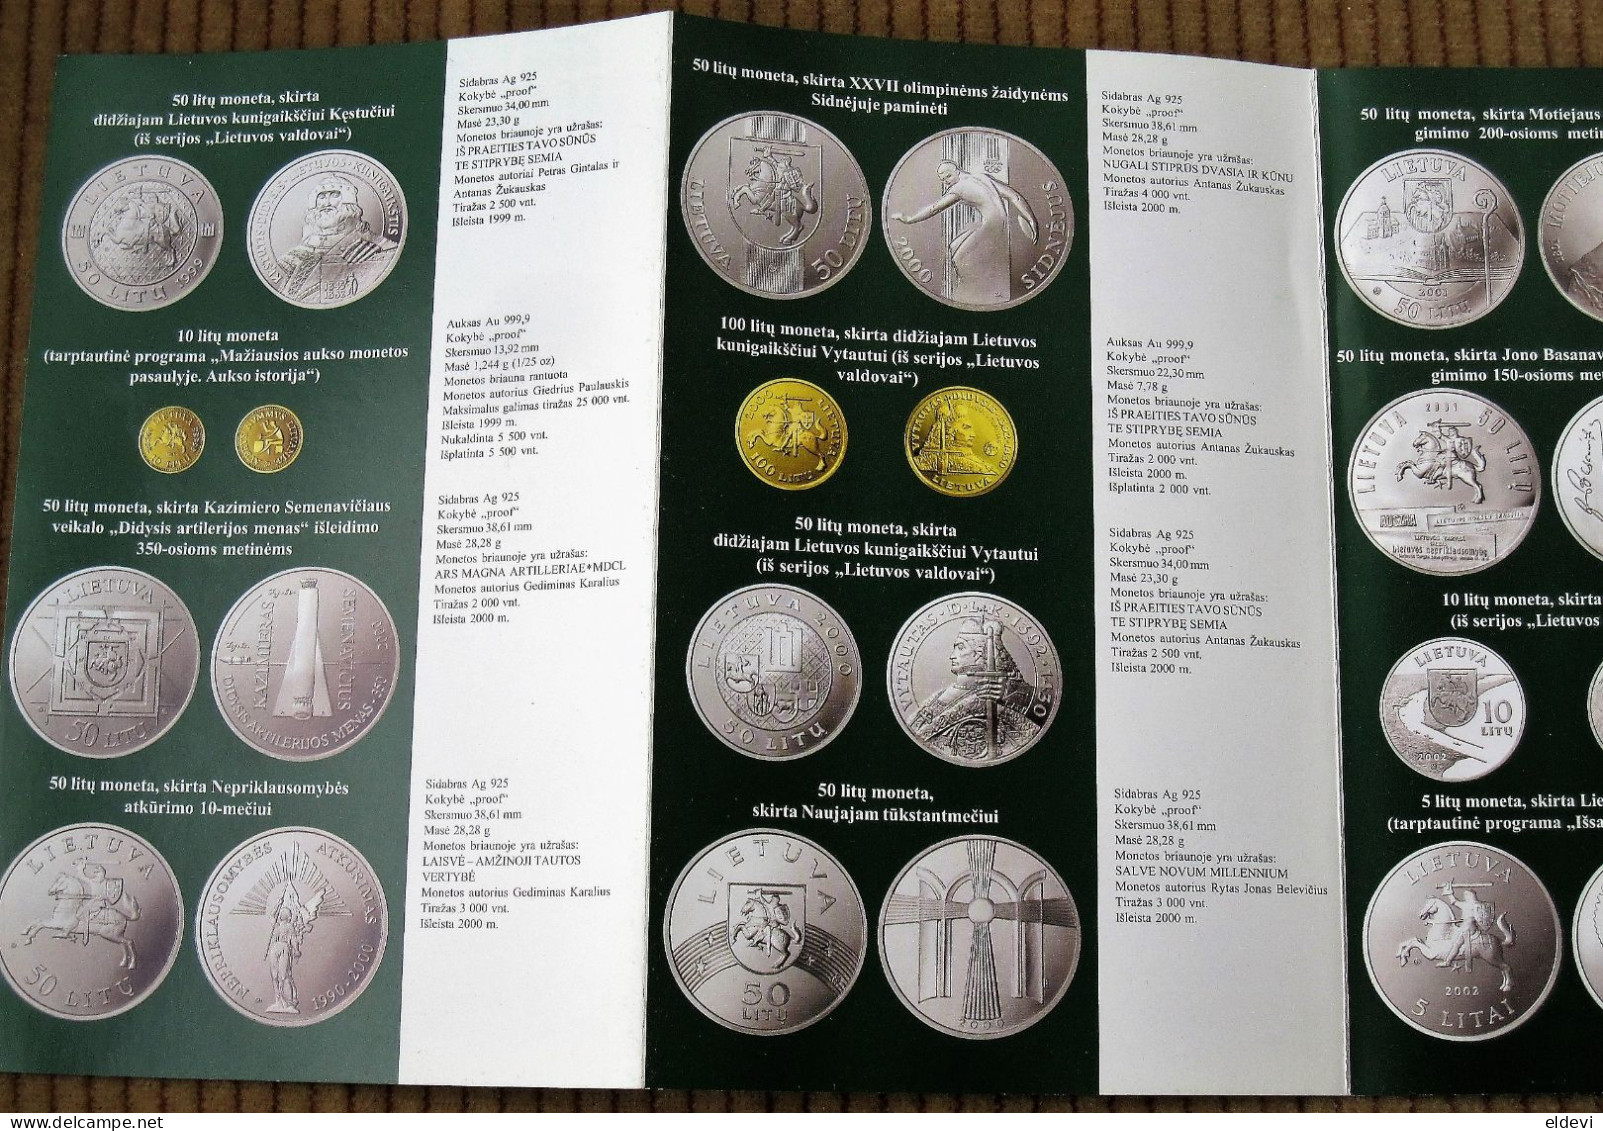 Lithuania Bank Booklet - Lithuanian Collectors Coins 1993 - 2000's / #4 - Lithuania